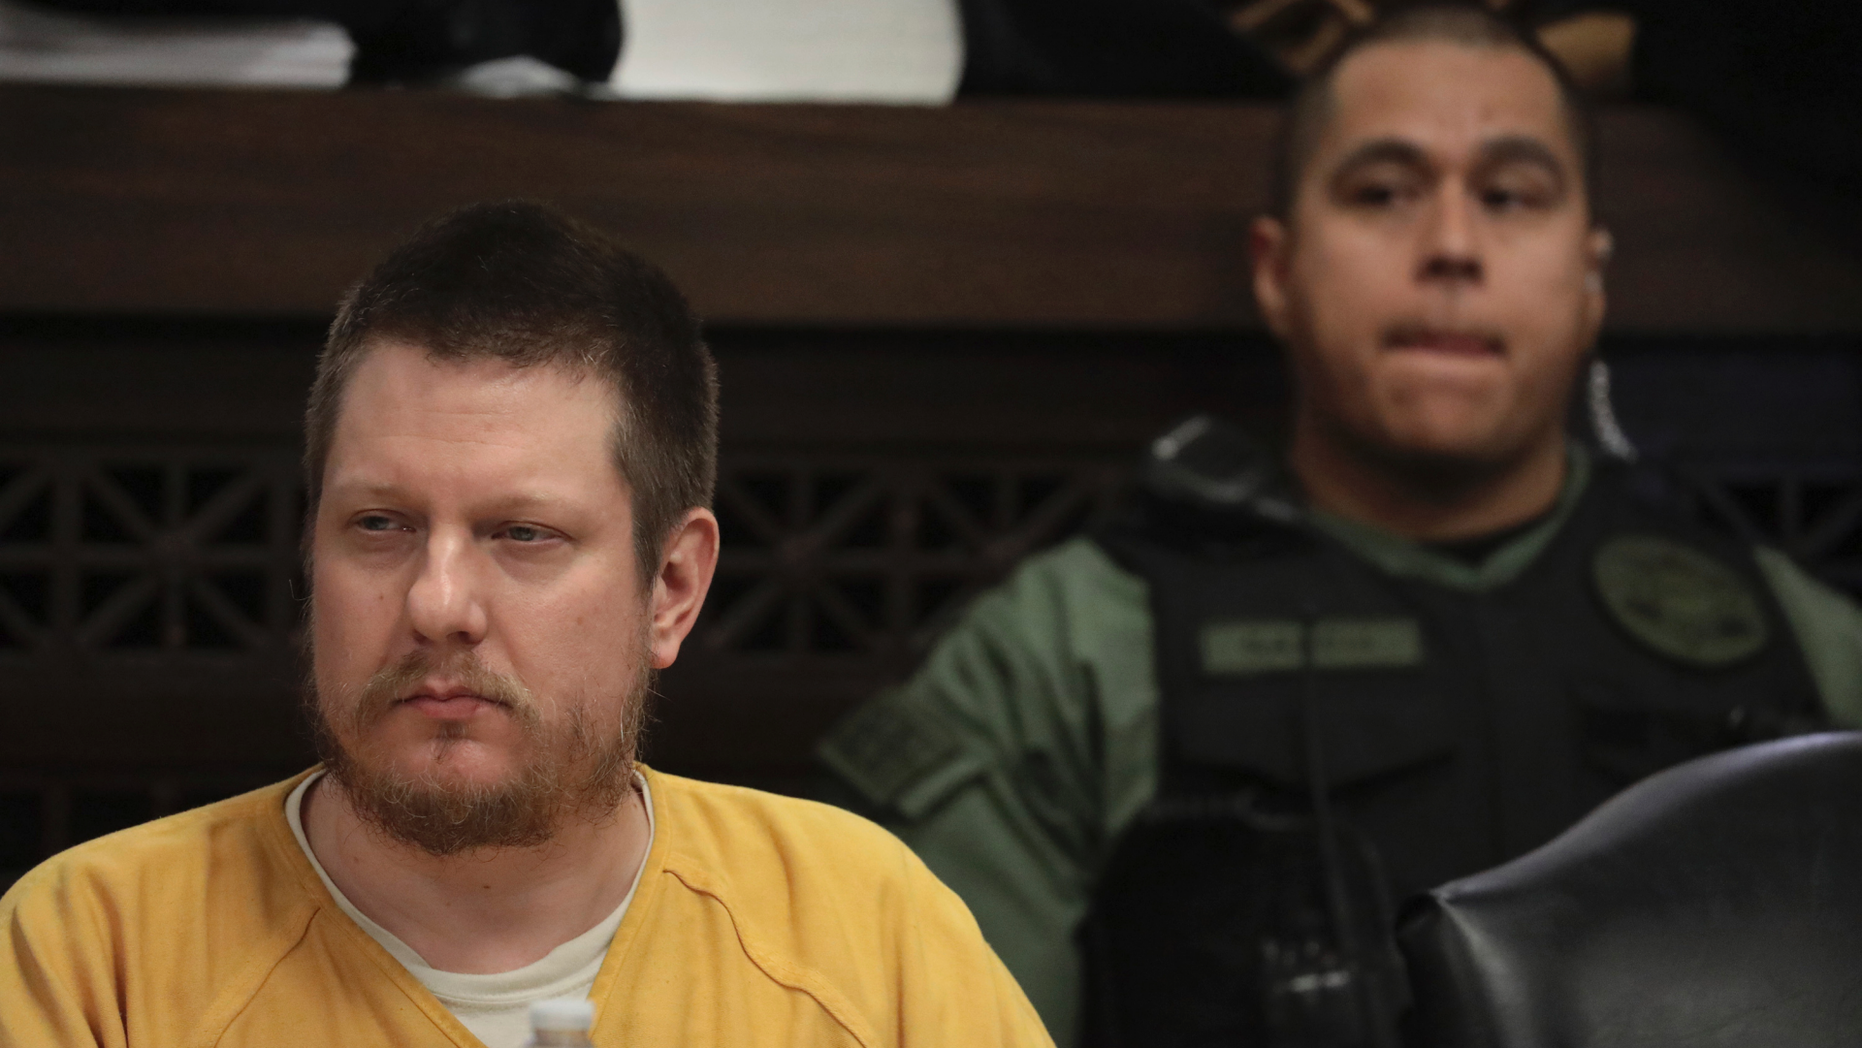 Former Chicago police officer Jason Van Dyke attends his sentencing hearing at the Leighton Criminal Court Building in Chicago on Friday. (Antonio Perez/Chicago Tribune via AP, Pool)